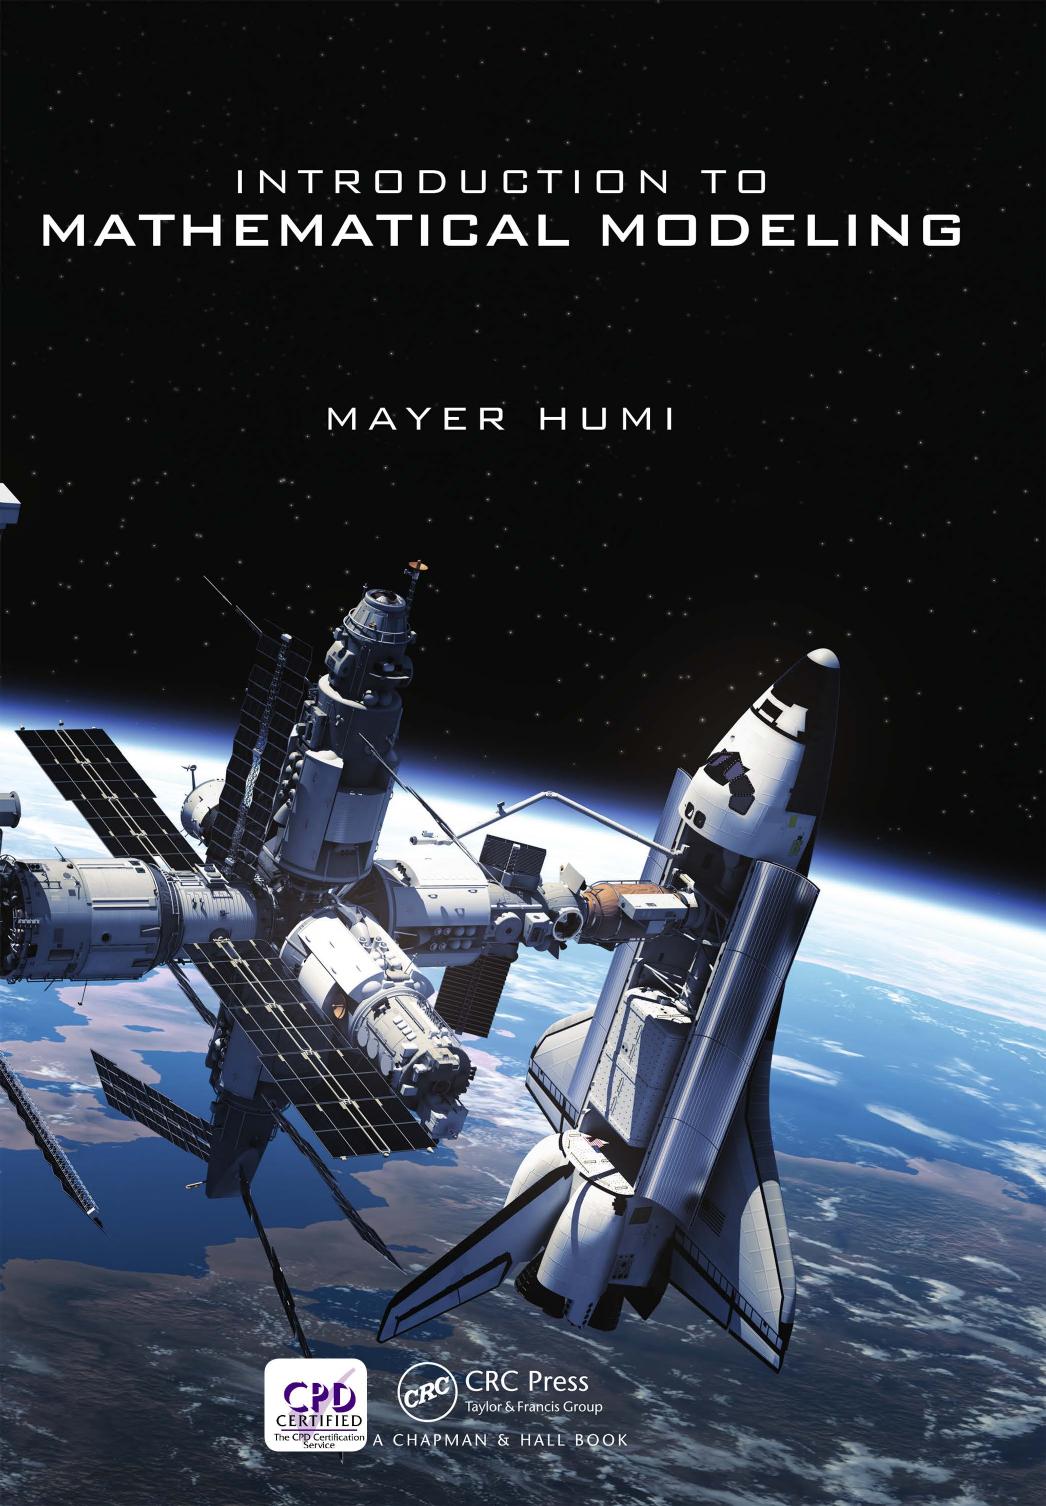 INTRODUCTION TO MATHEMATICAL MODELING